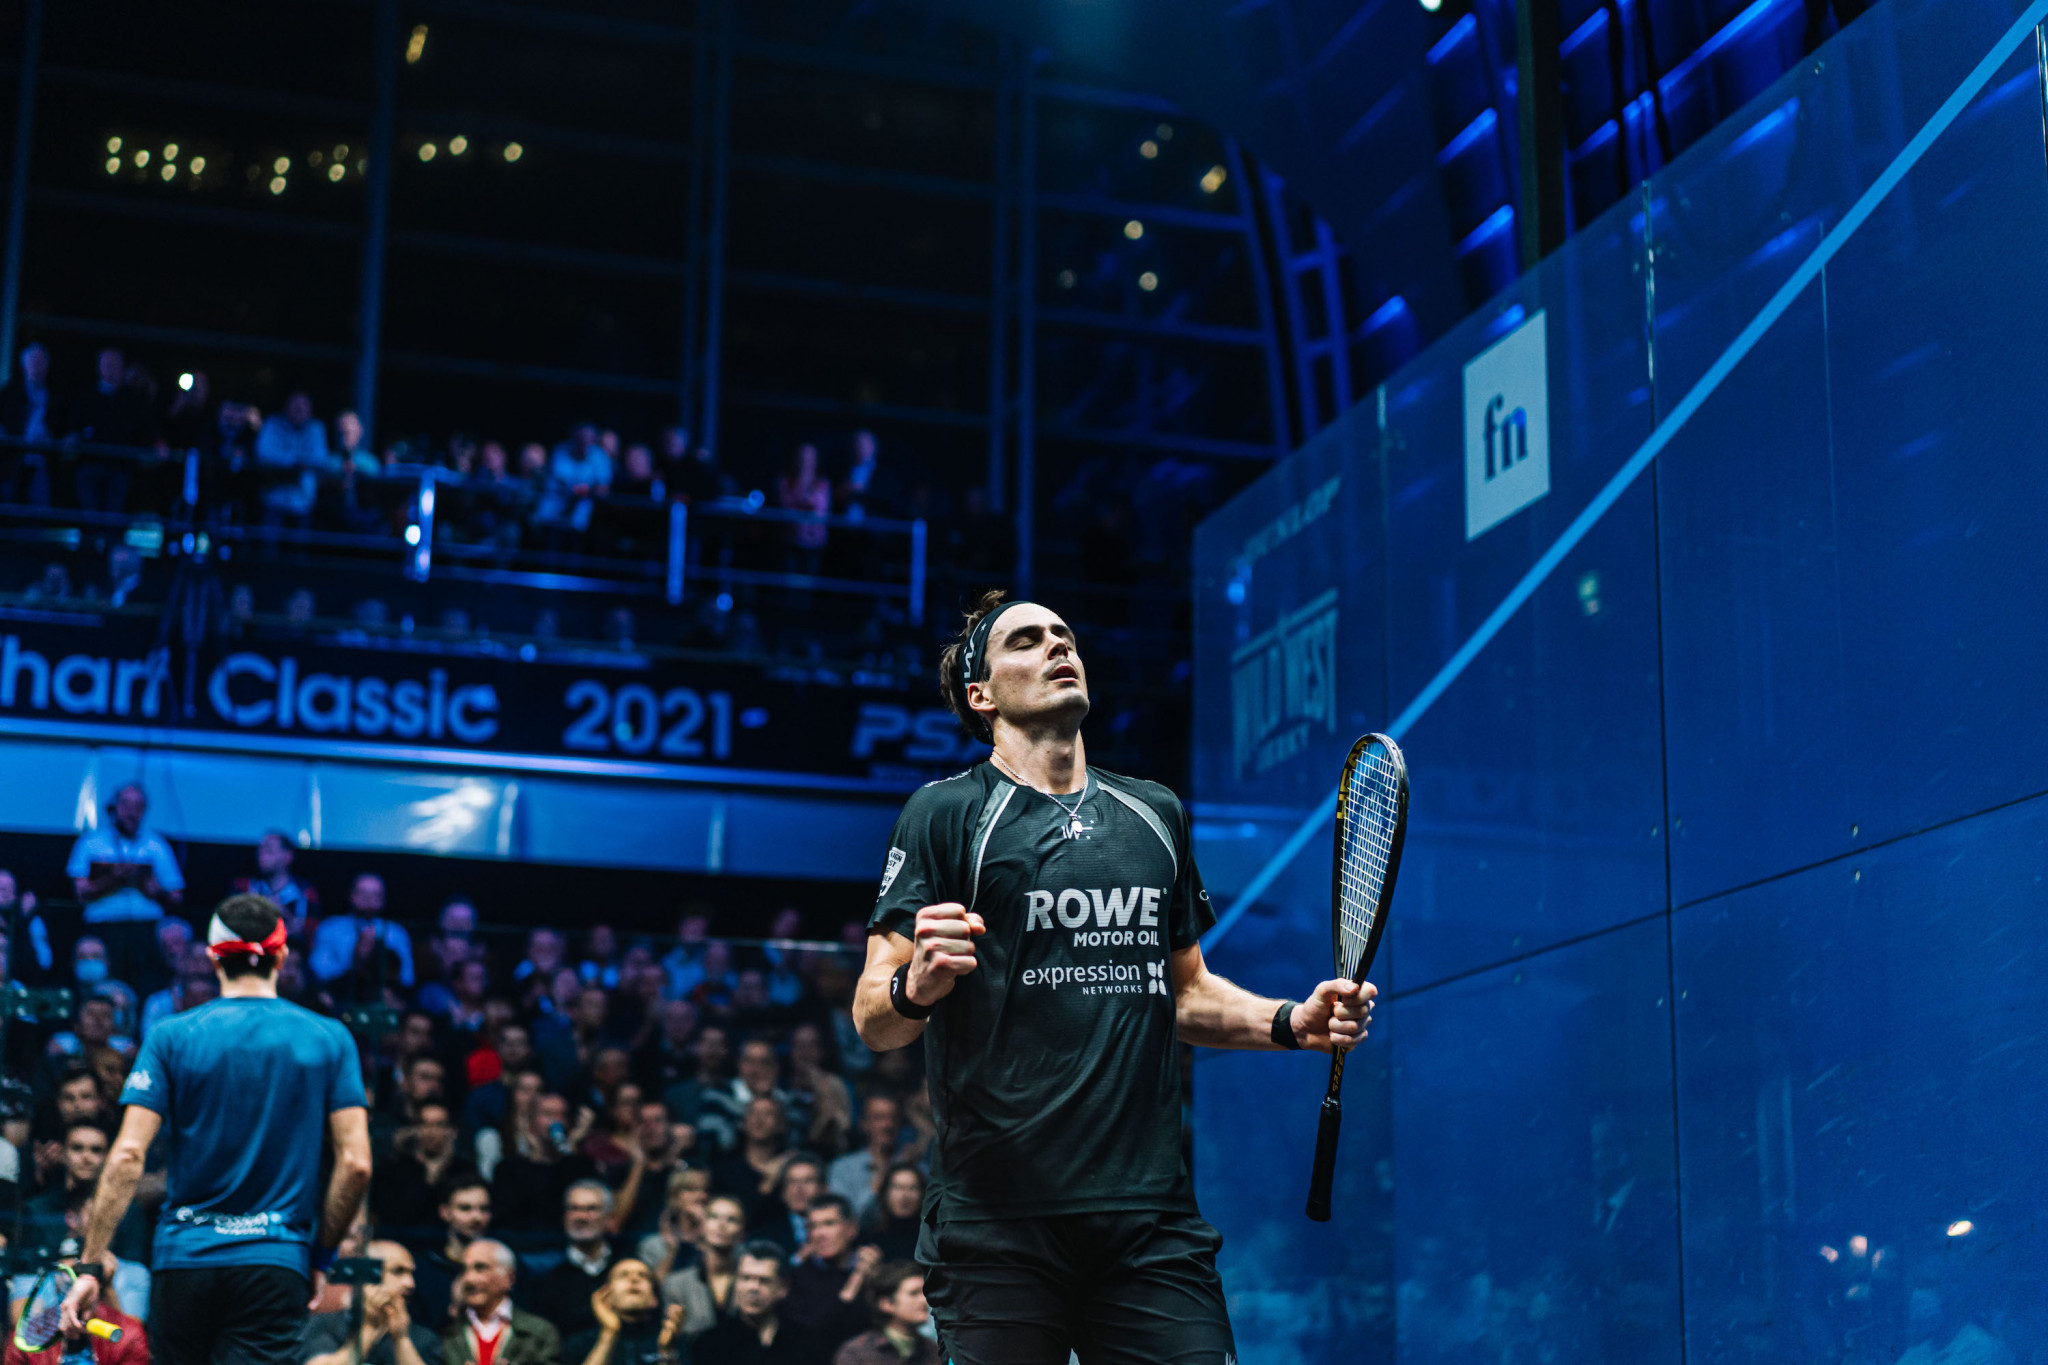 Paul Coll avenged his defeat to Diego Elias to move into the Canary Wharf Classic final ©PSA World Tour